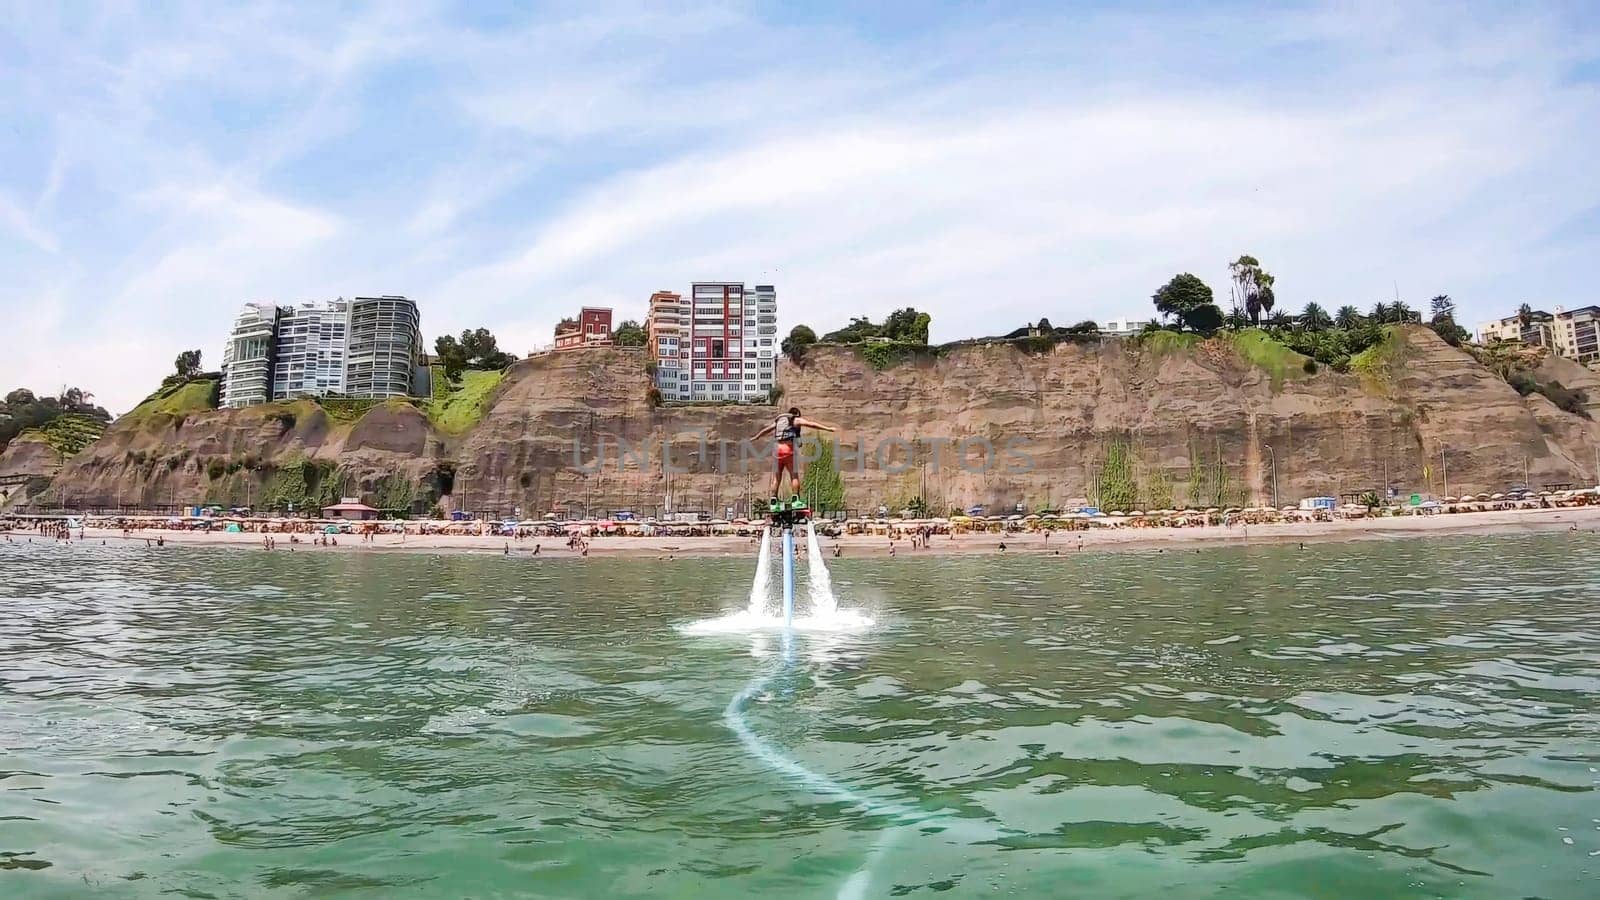 Adventurous individual soars above water using a jetpack, with a scenic city cliffside and beach in the background